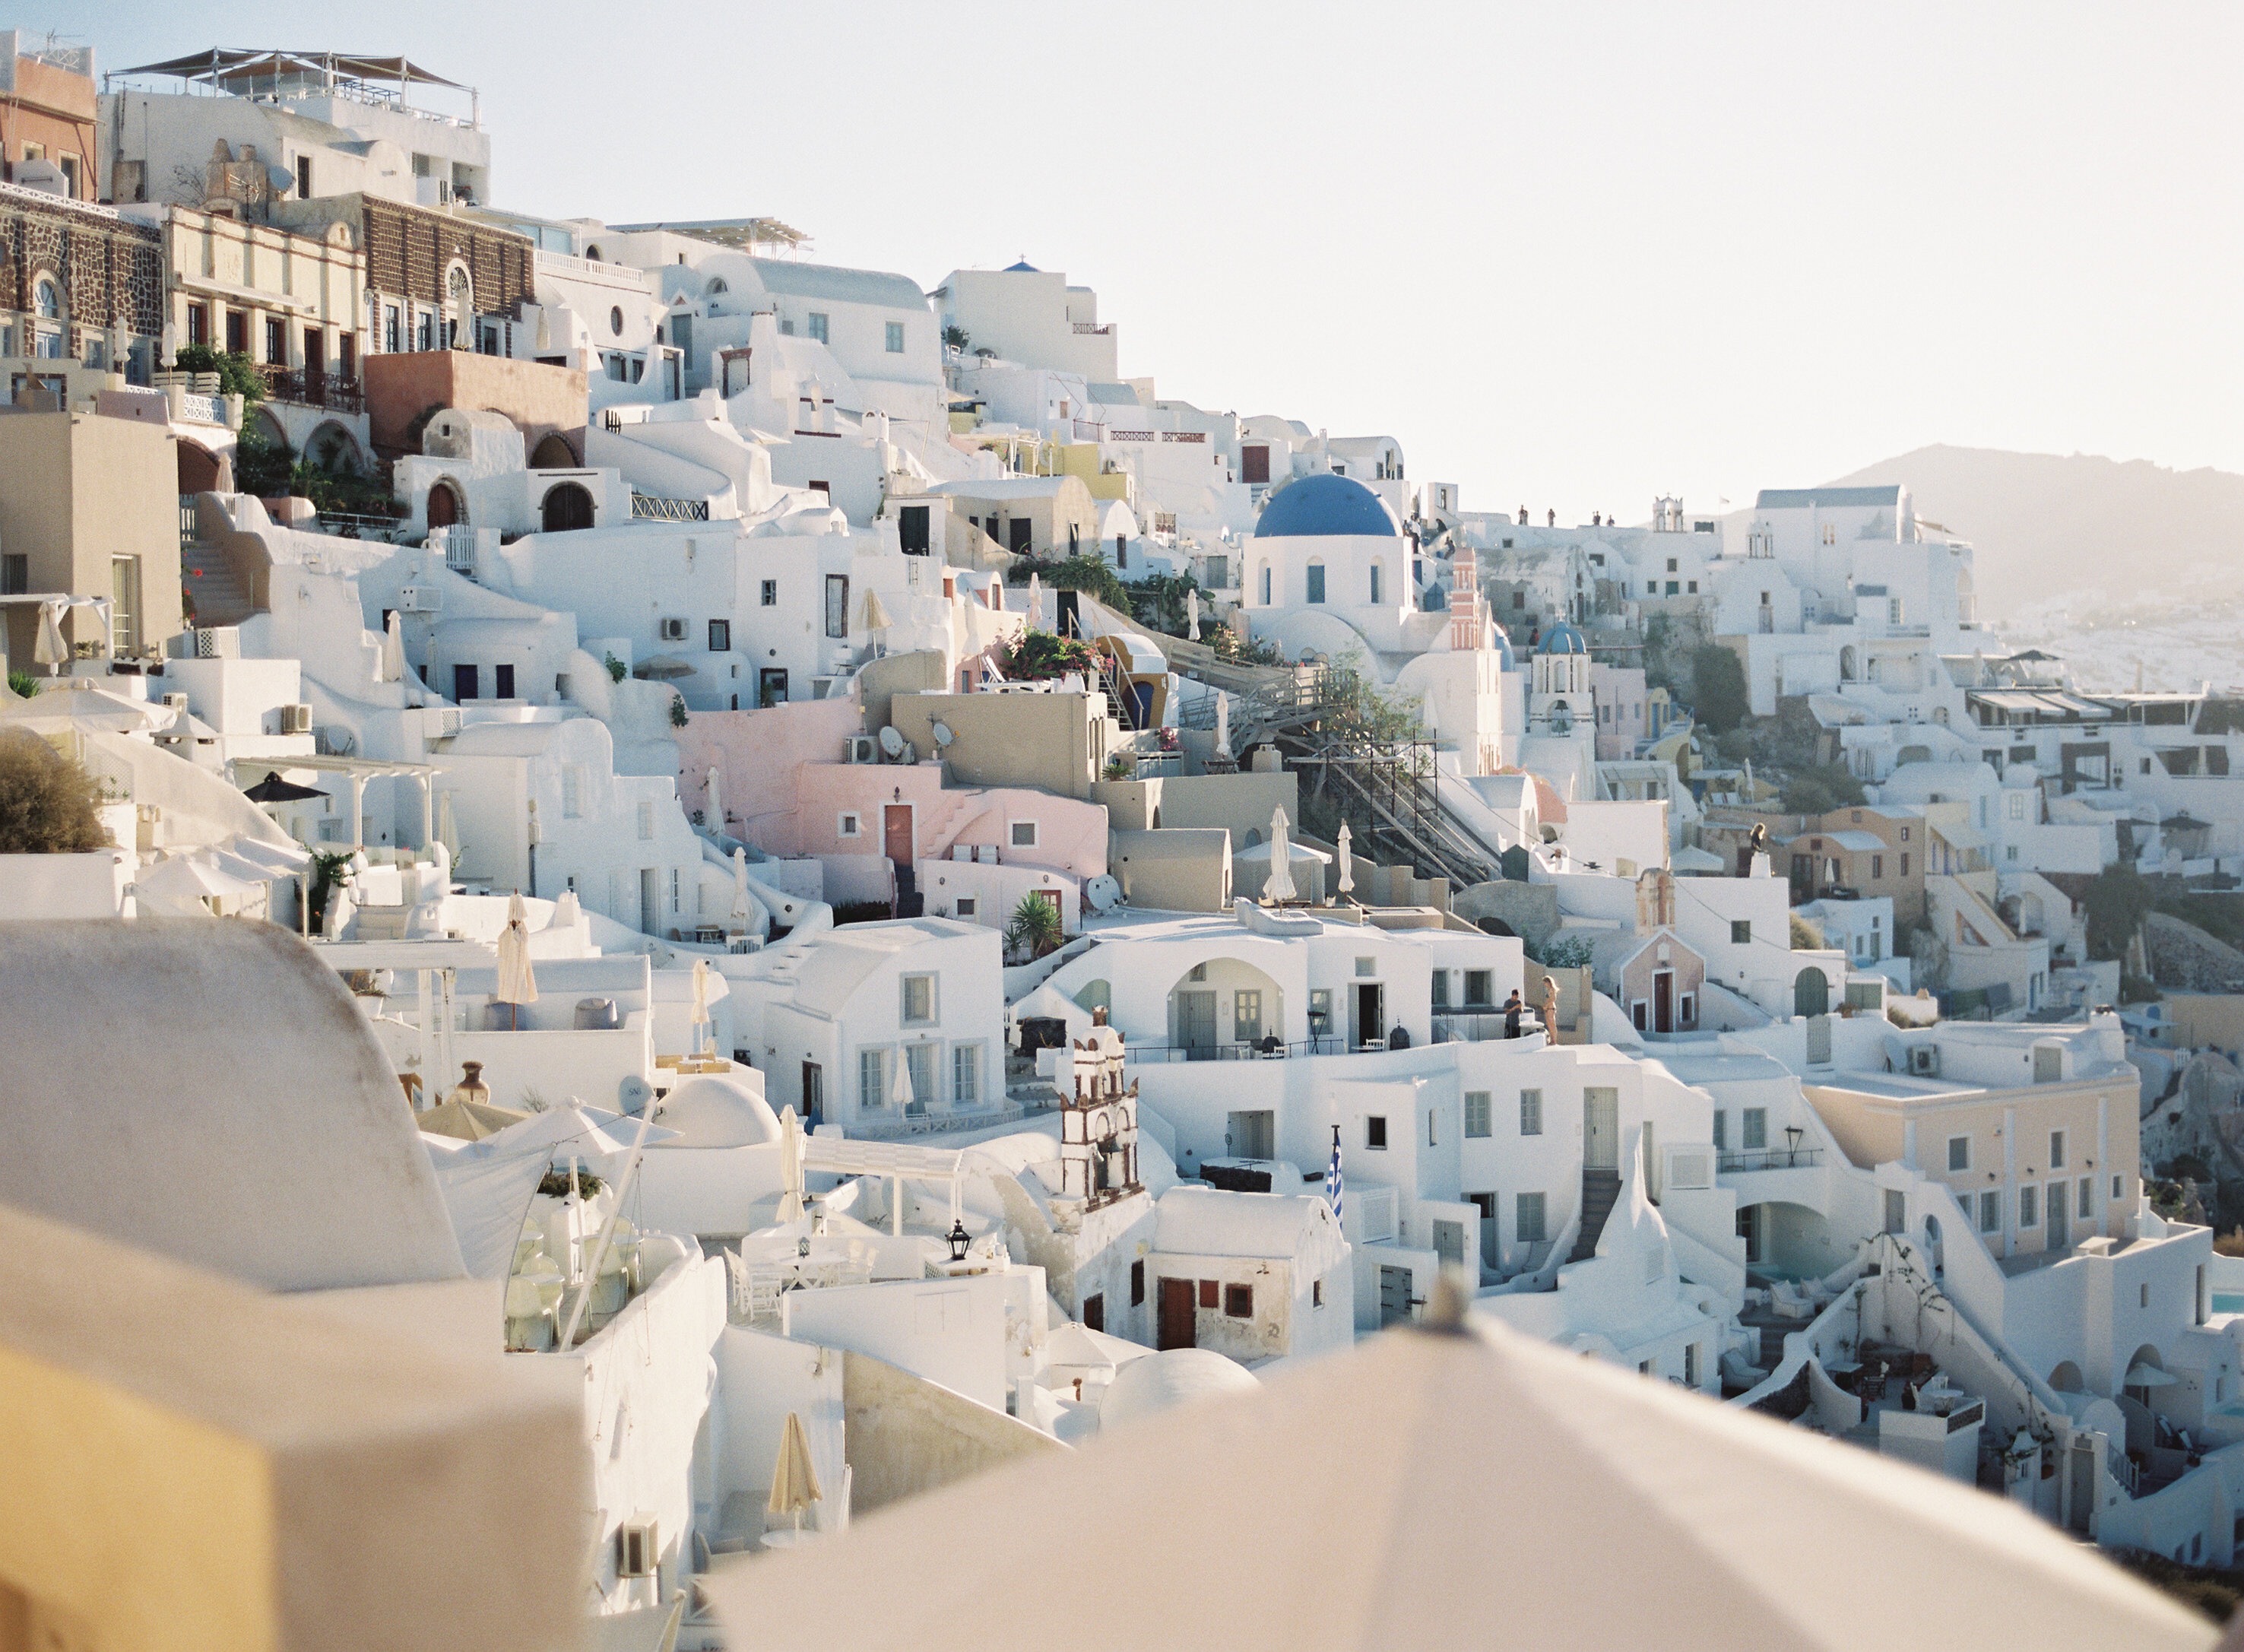 Elopements: How to find the ideal location - Santorini